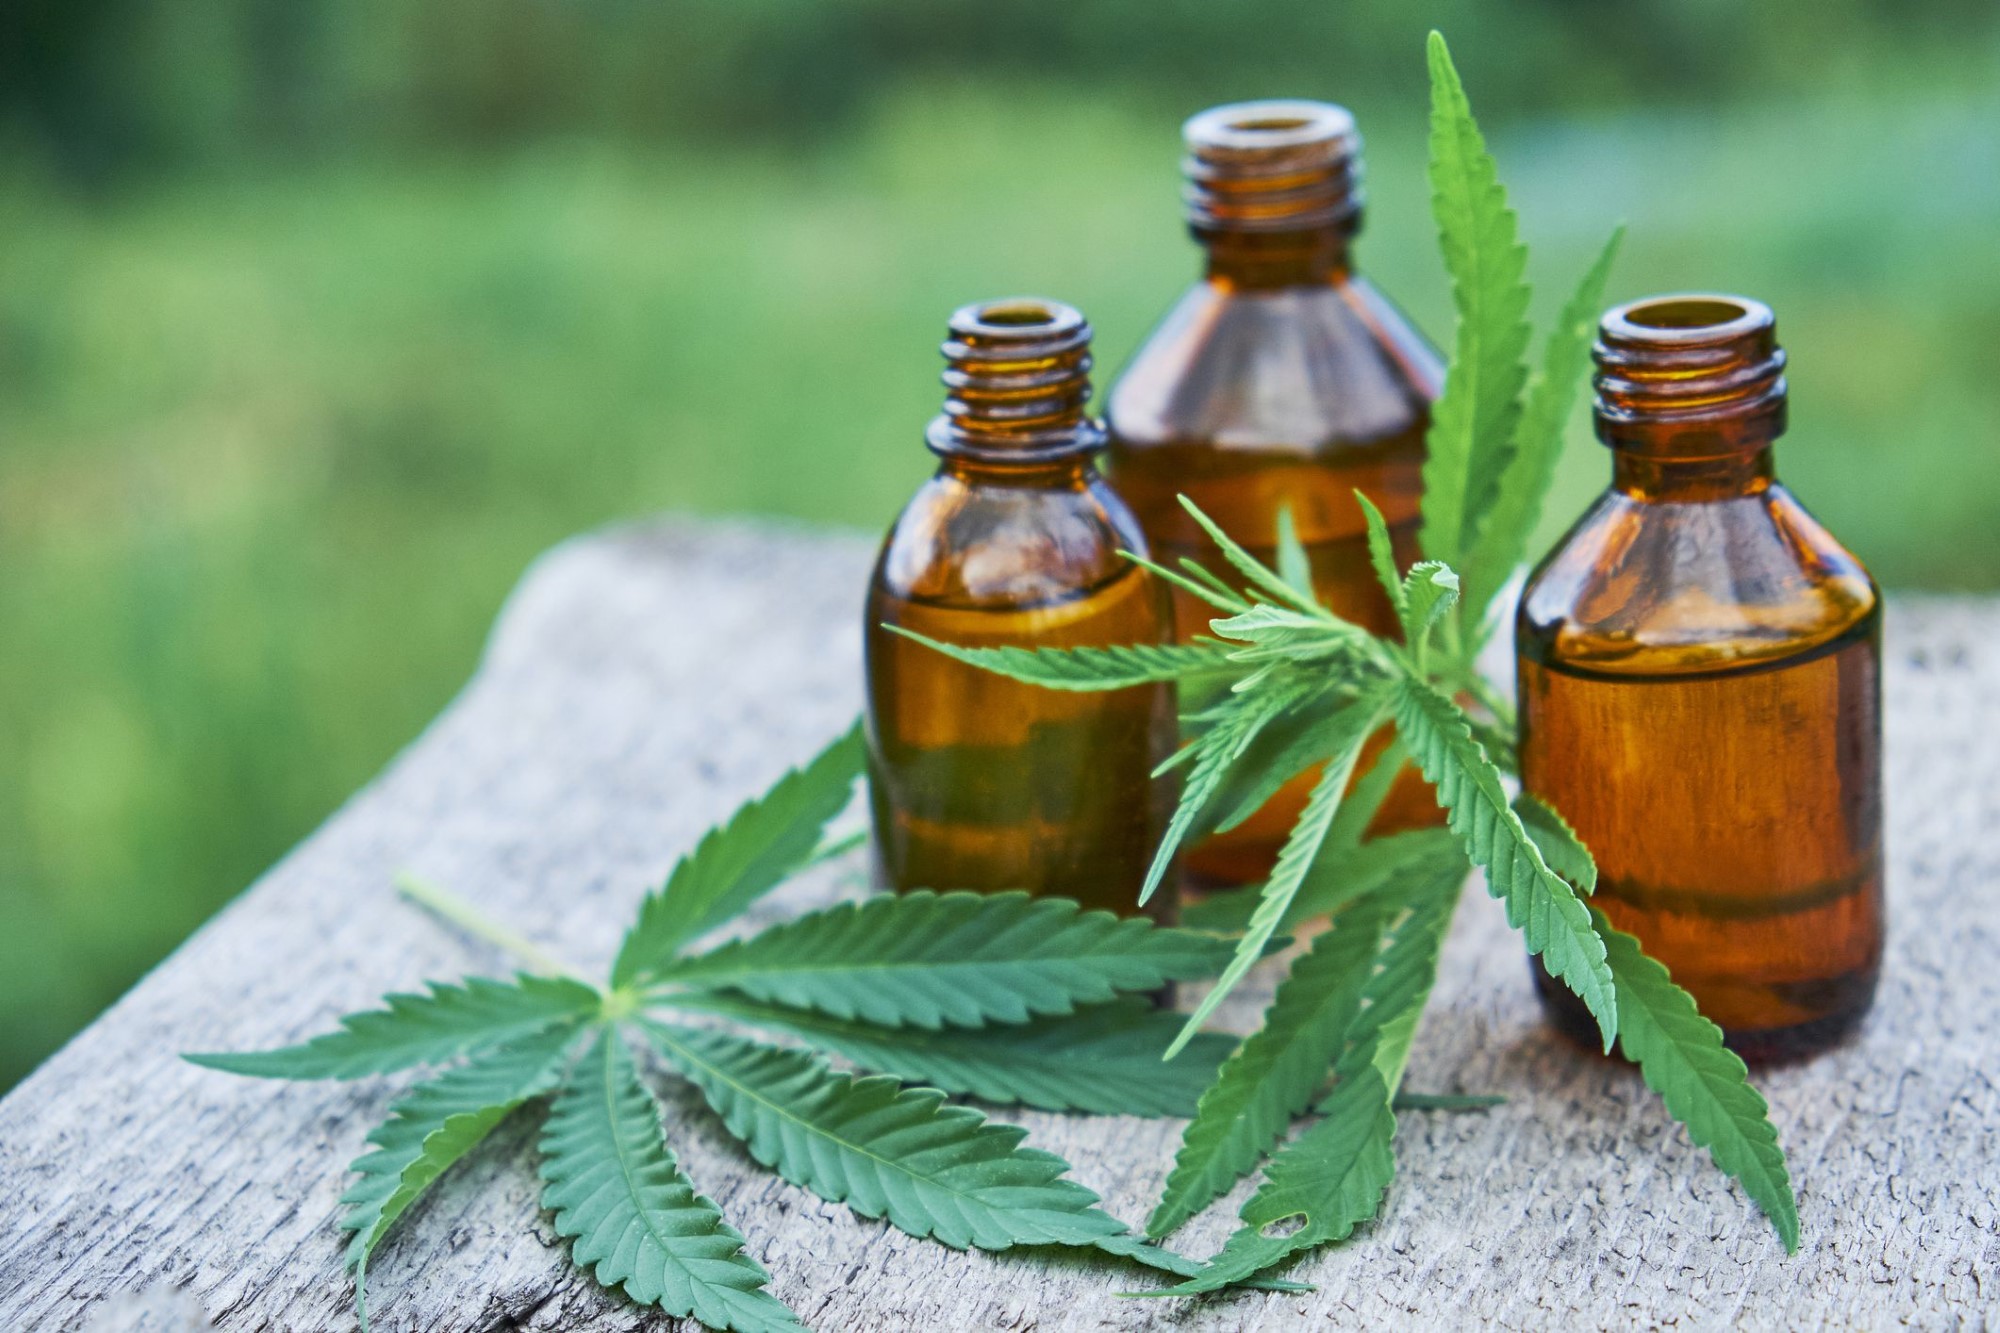 Things to Consider for Carefully Buying CBD Oil Online